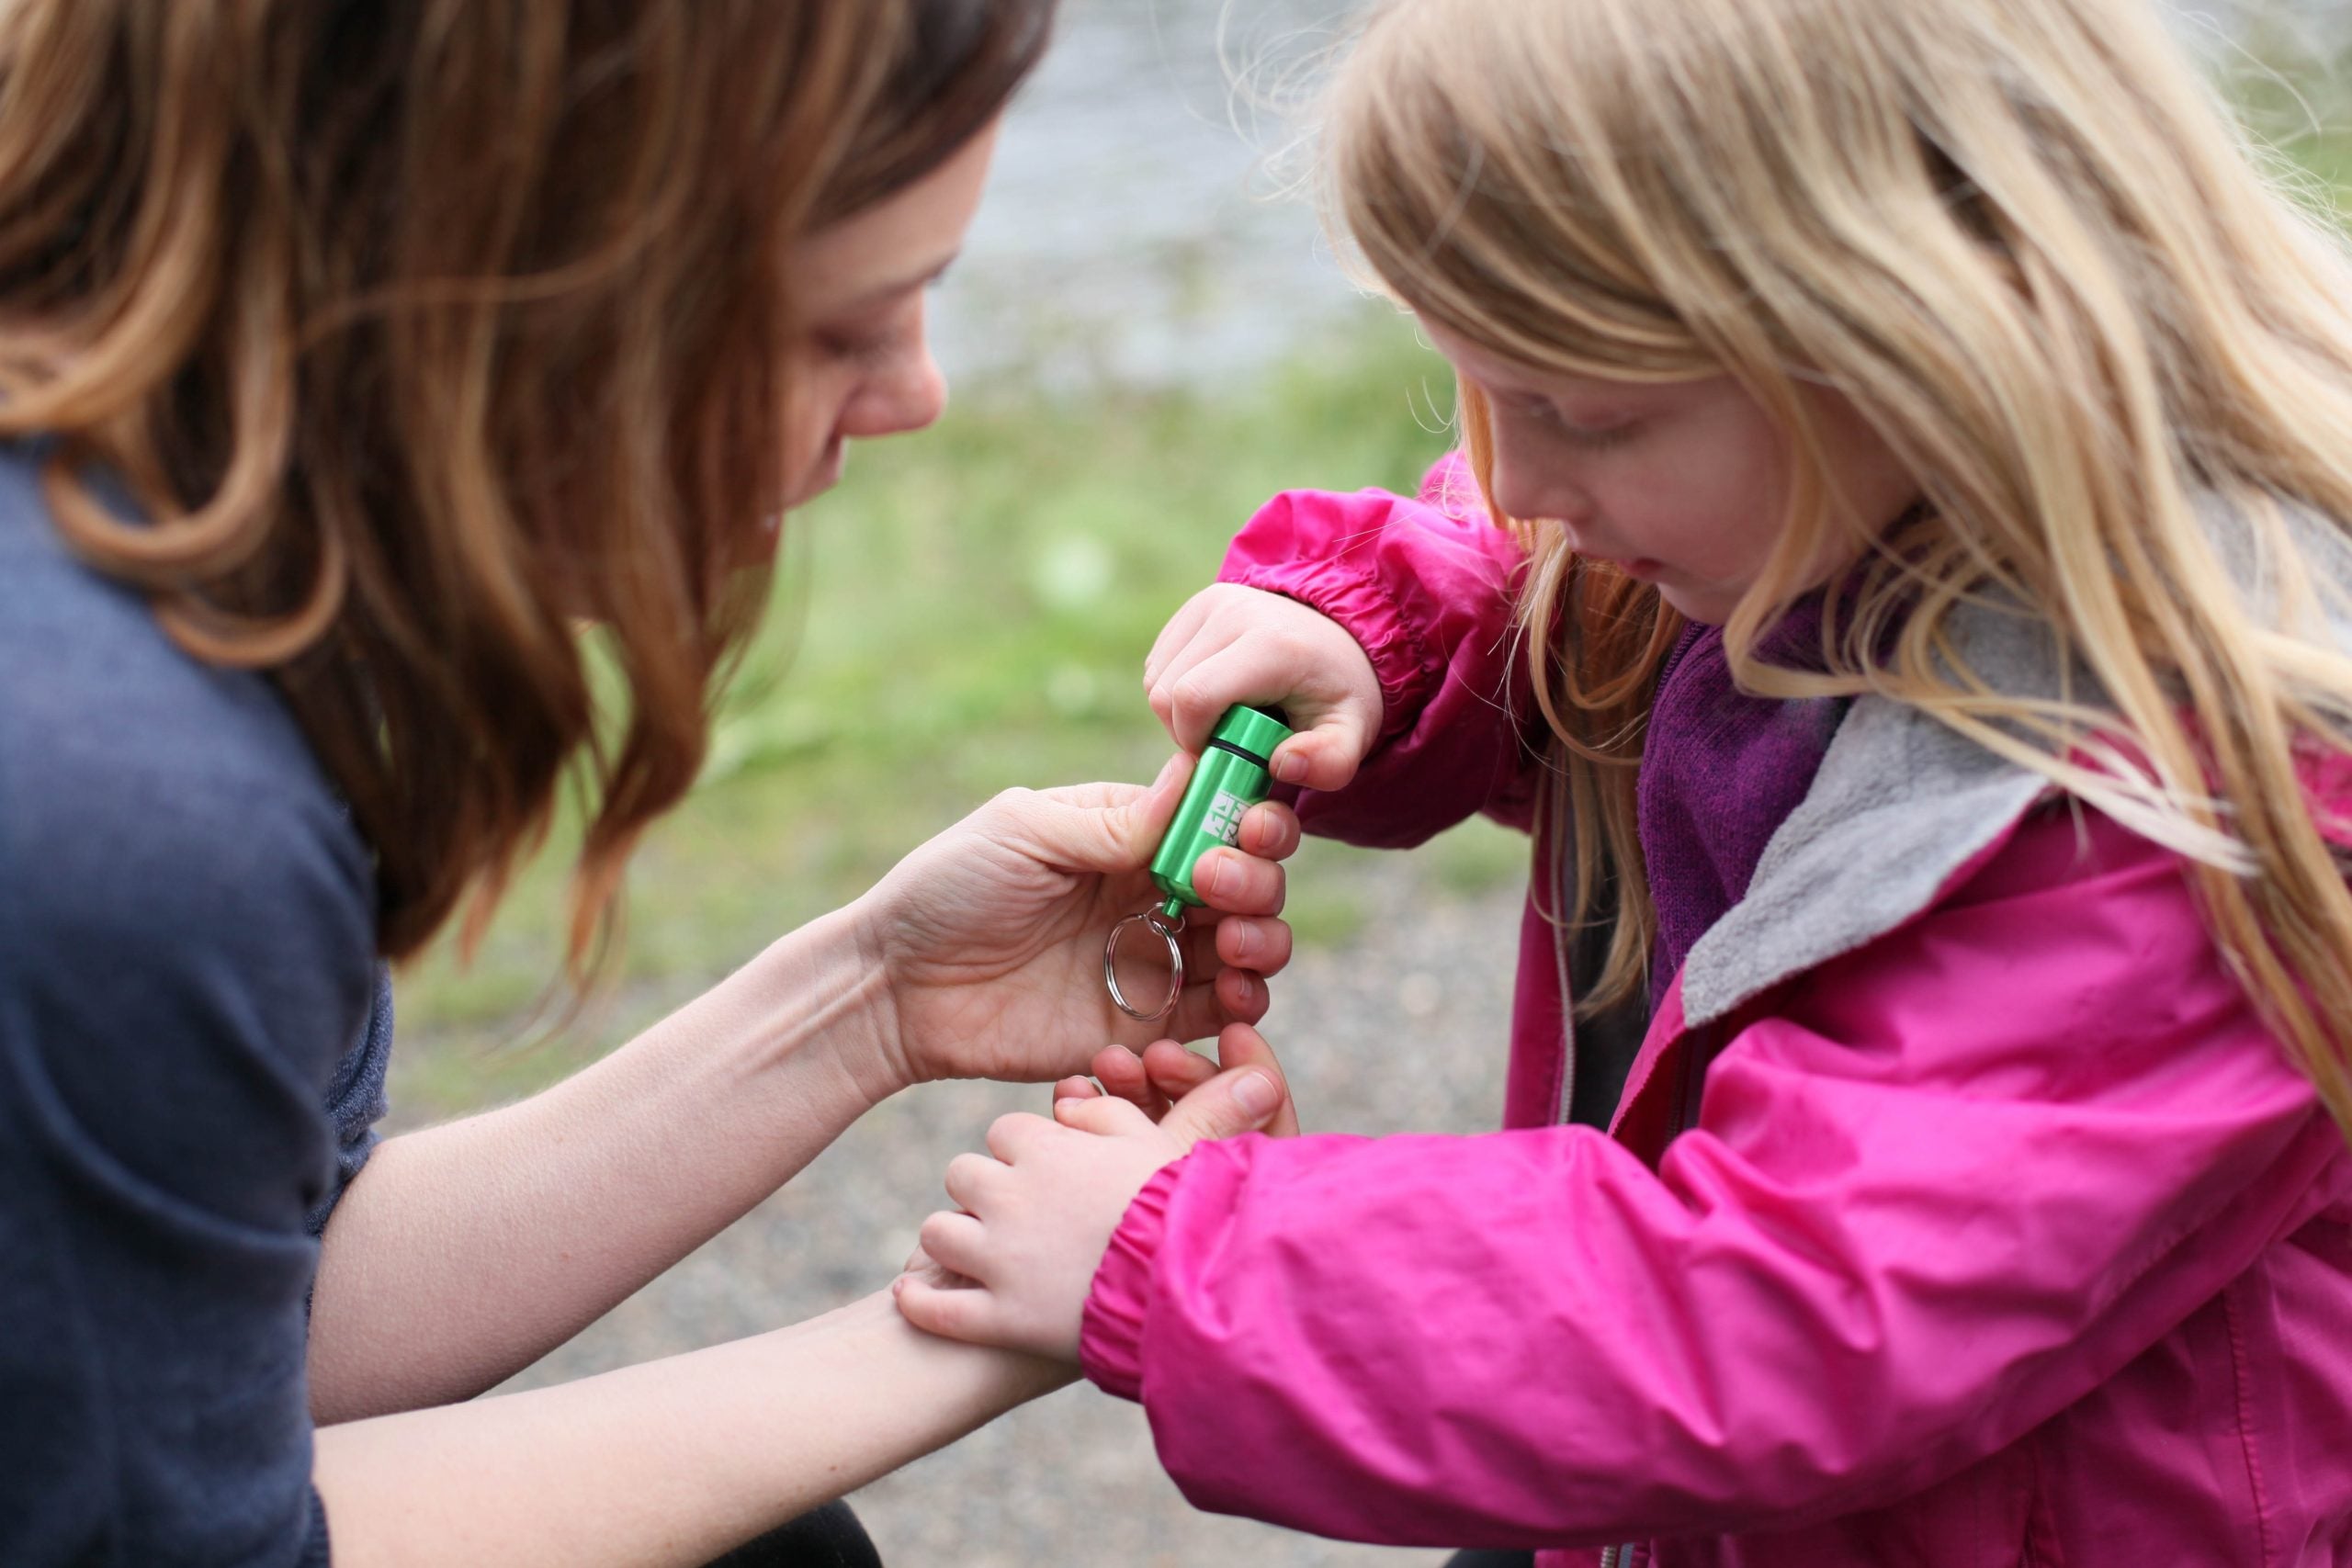 Children love to discover the world around them while geocaching. Photo courtesy of geocaching.com.